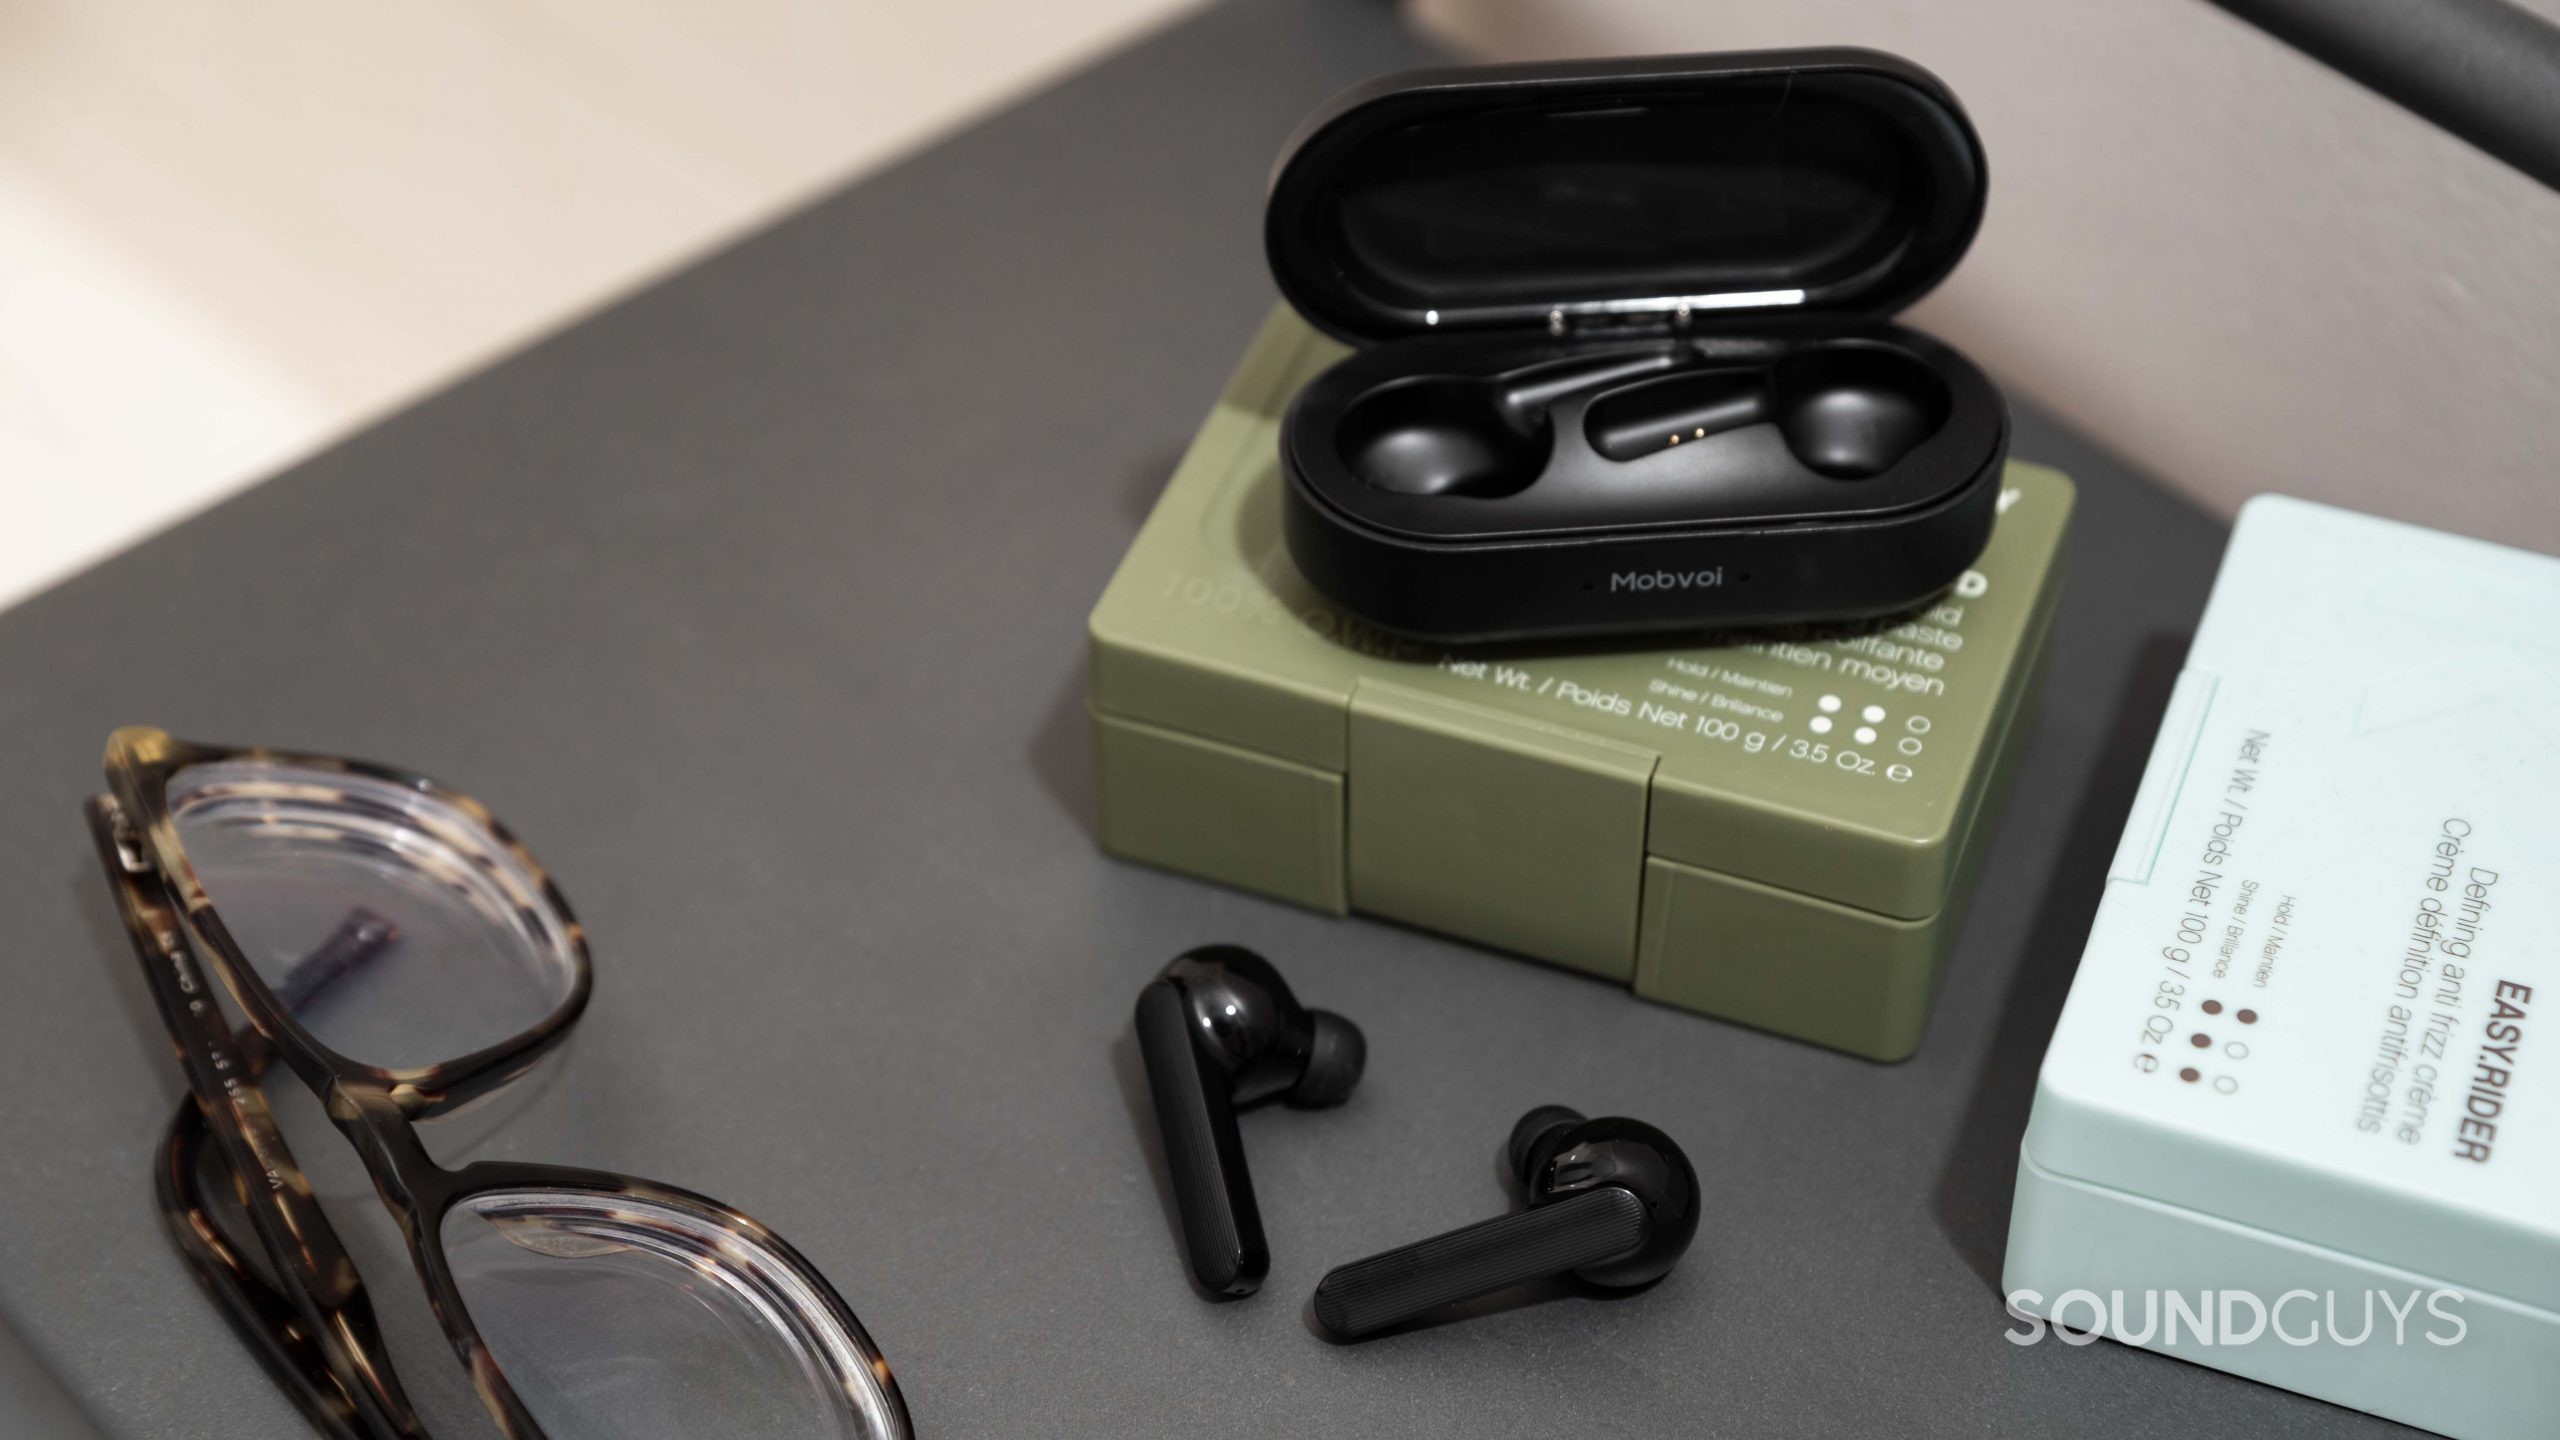 The Mobvoi Earbuds Gesture true wireless earbuds outside of the open USB-C charging case, which rests on top of hair pomade.